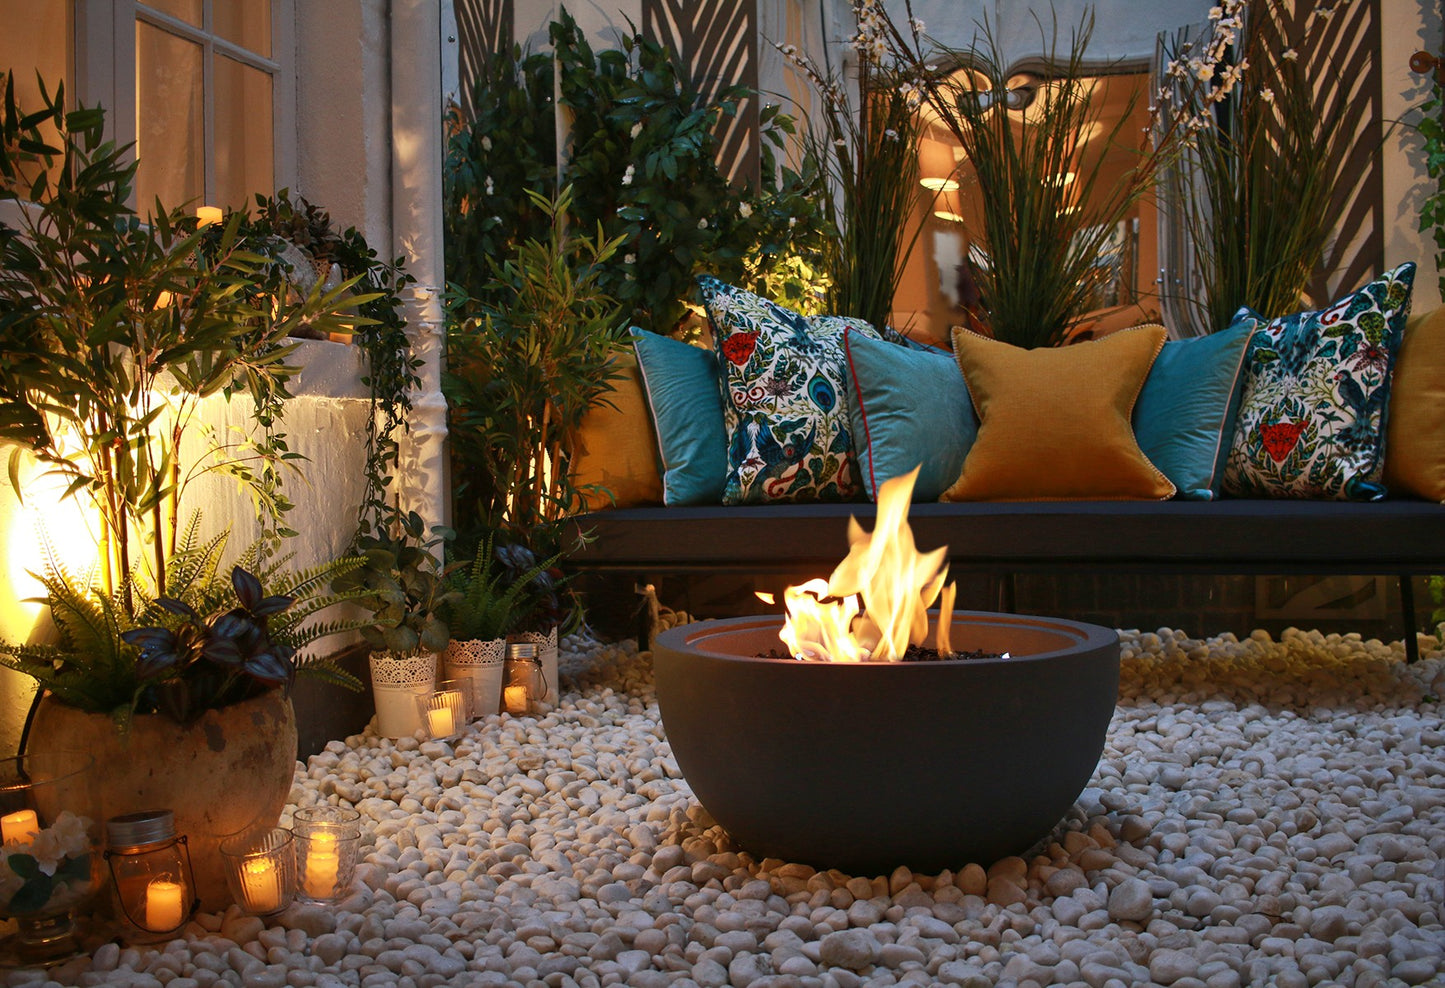 Mini Grey Bioethanol Firepit Outdoor Fireplace in paved garden